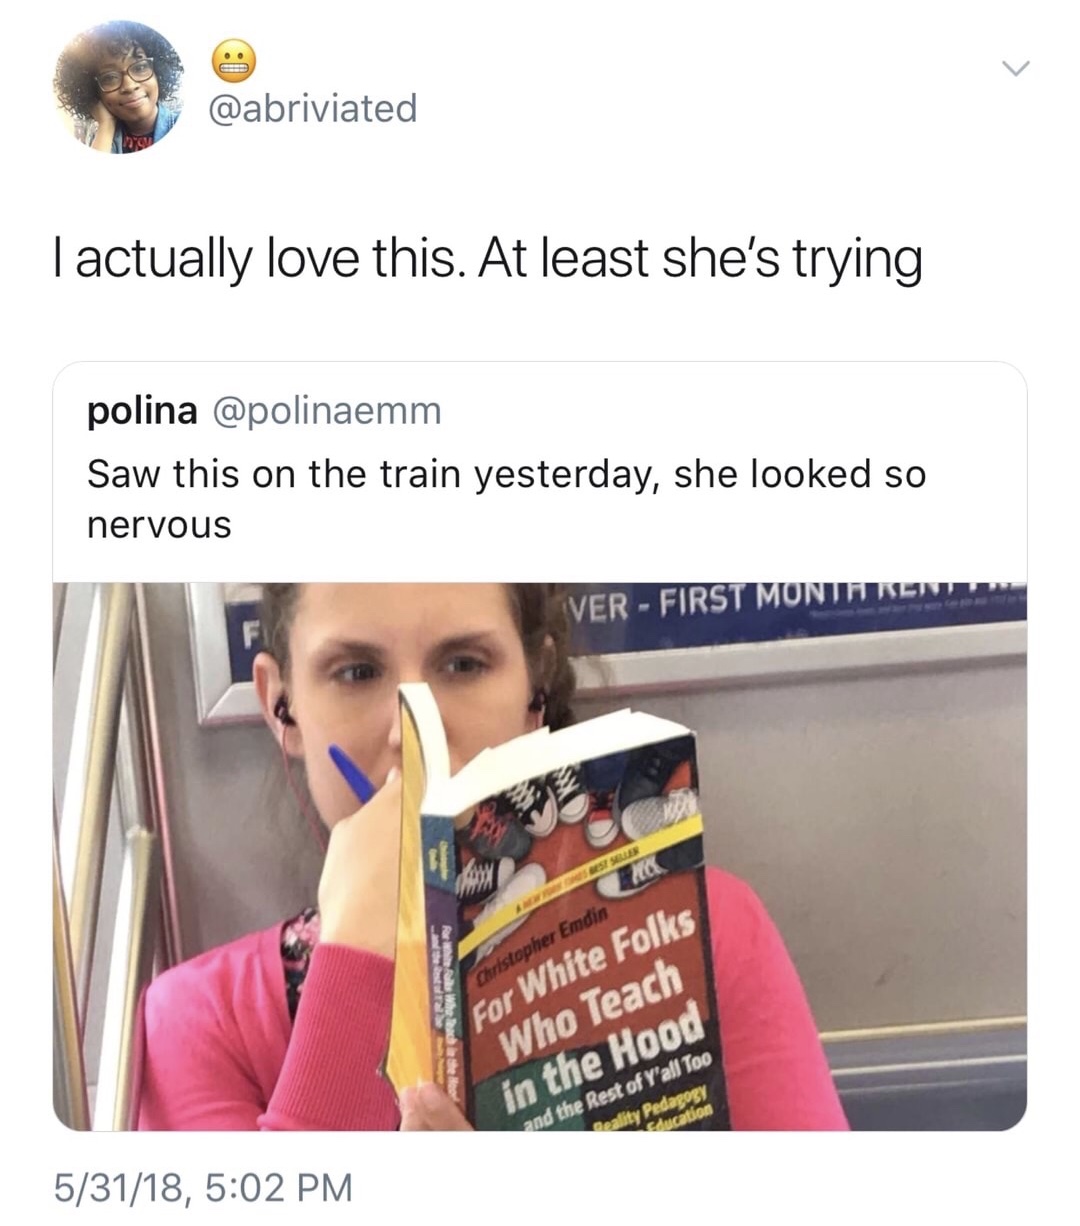 media - no I actually love this. At least she's trying polina Saw this on the train yesterday, she looked so nervous Ver First Monje Rew Christopher Emdin For White Folks Who Teach in the Hood and the rest of Y'all Too 53118,